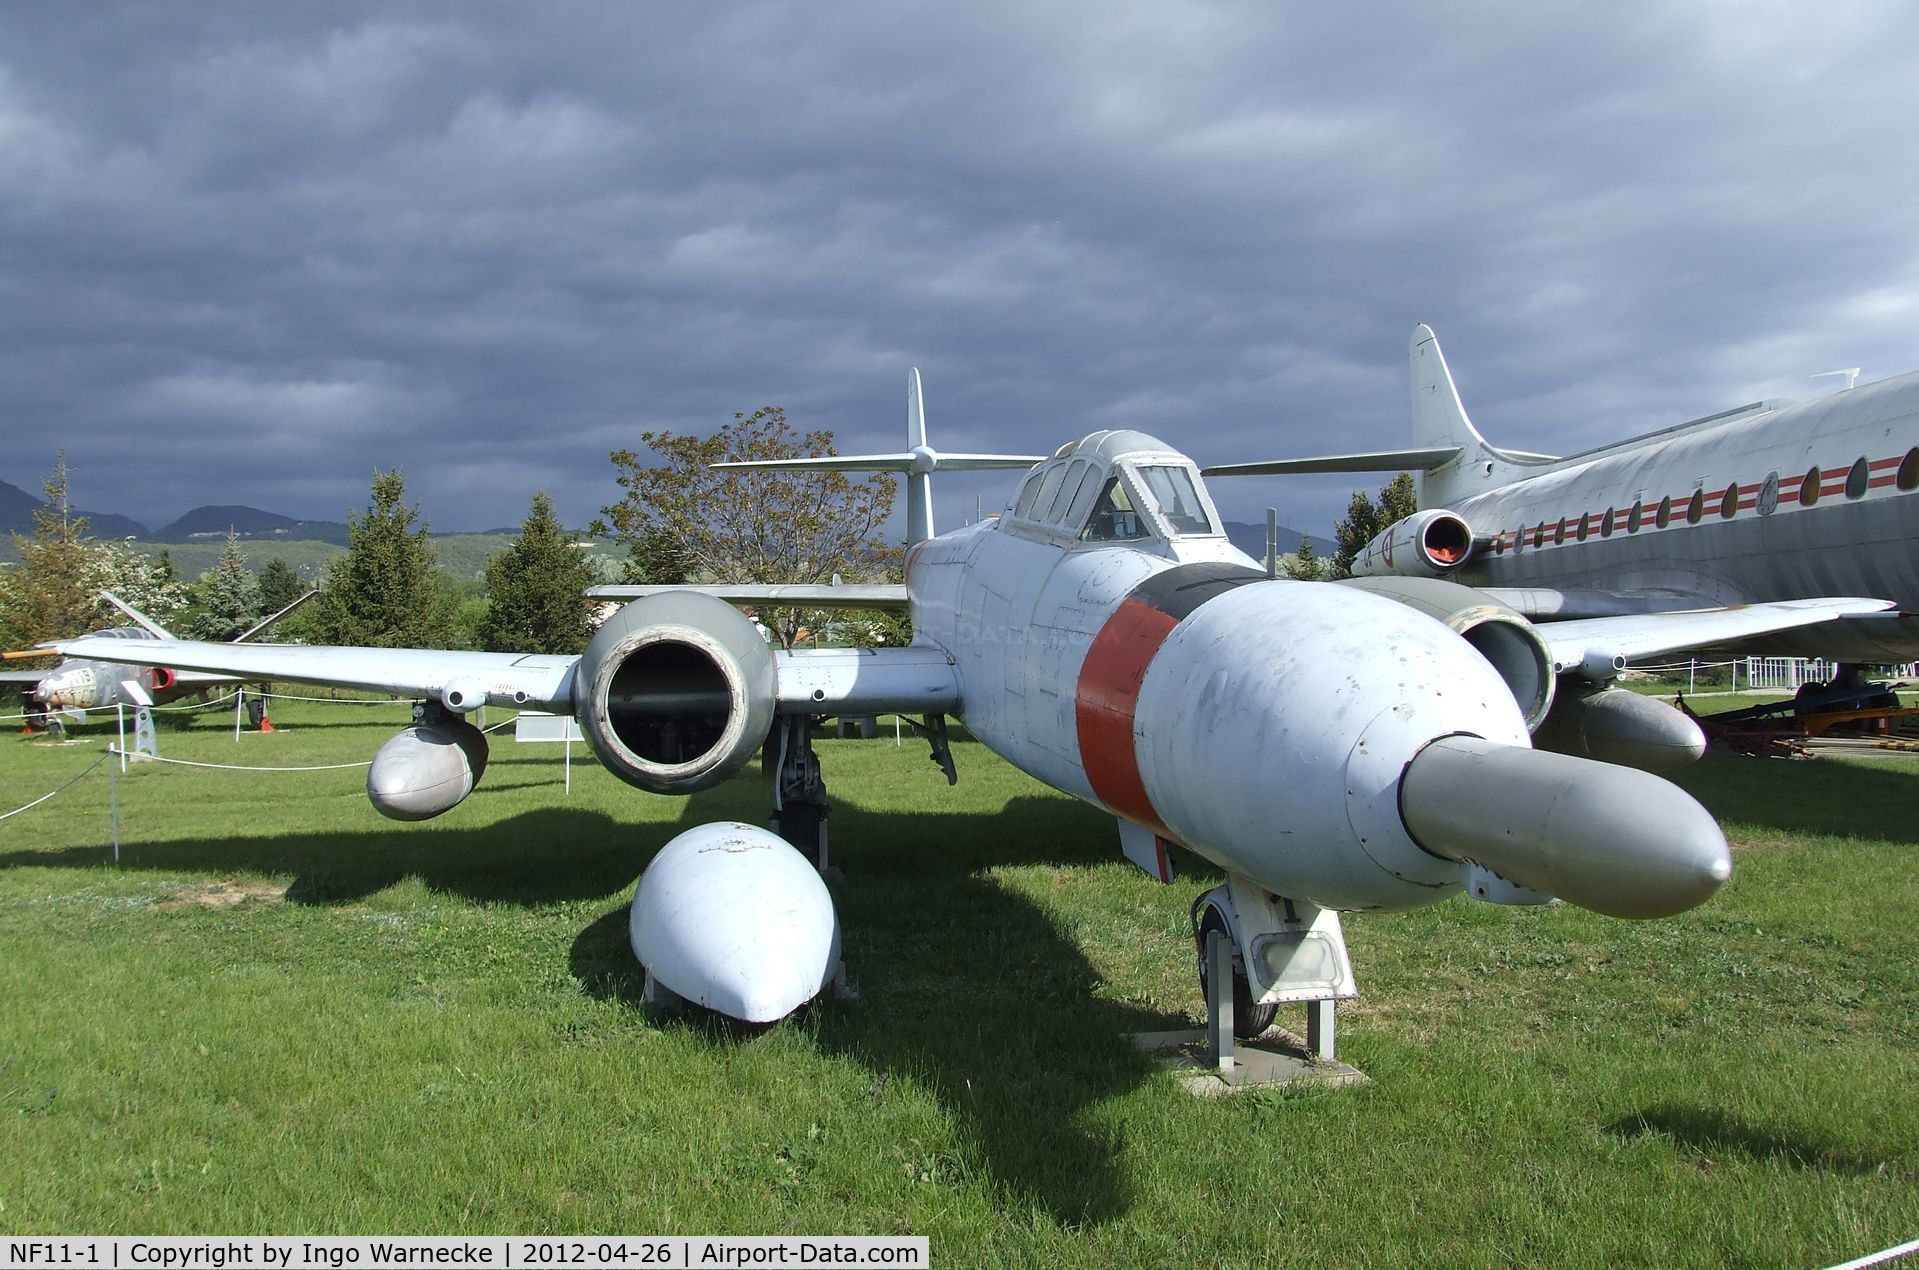 NF11-1, Gloster Meteor NF.11 C/N Not found NF11-1, Gloster Meteor NF11 at the Musée Européen de l'Aviation de Chasse, Montelimar Ancone airfield